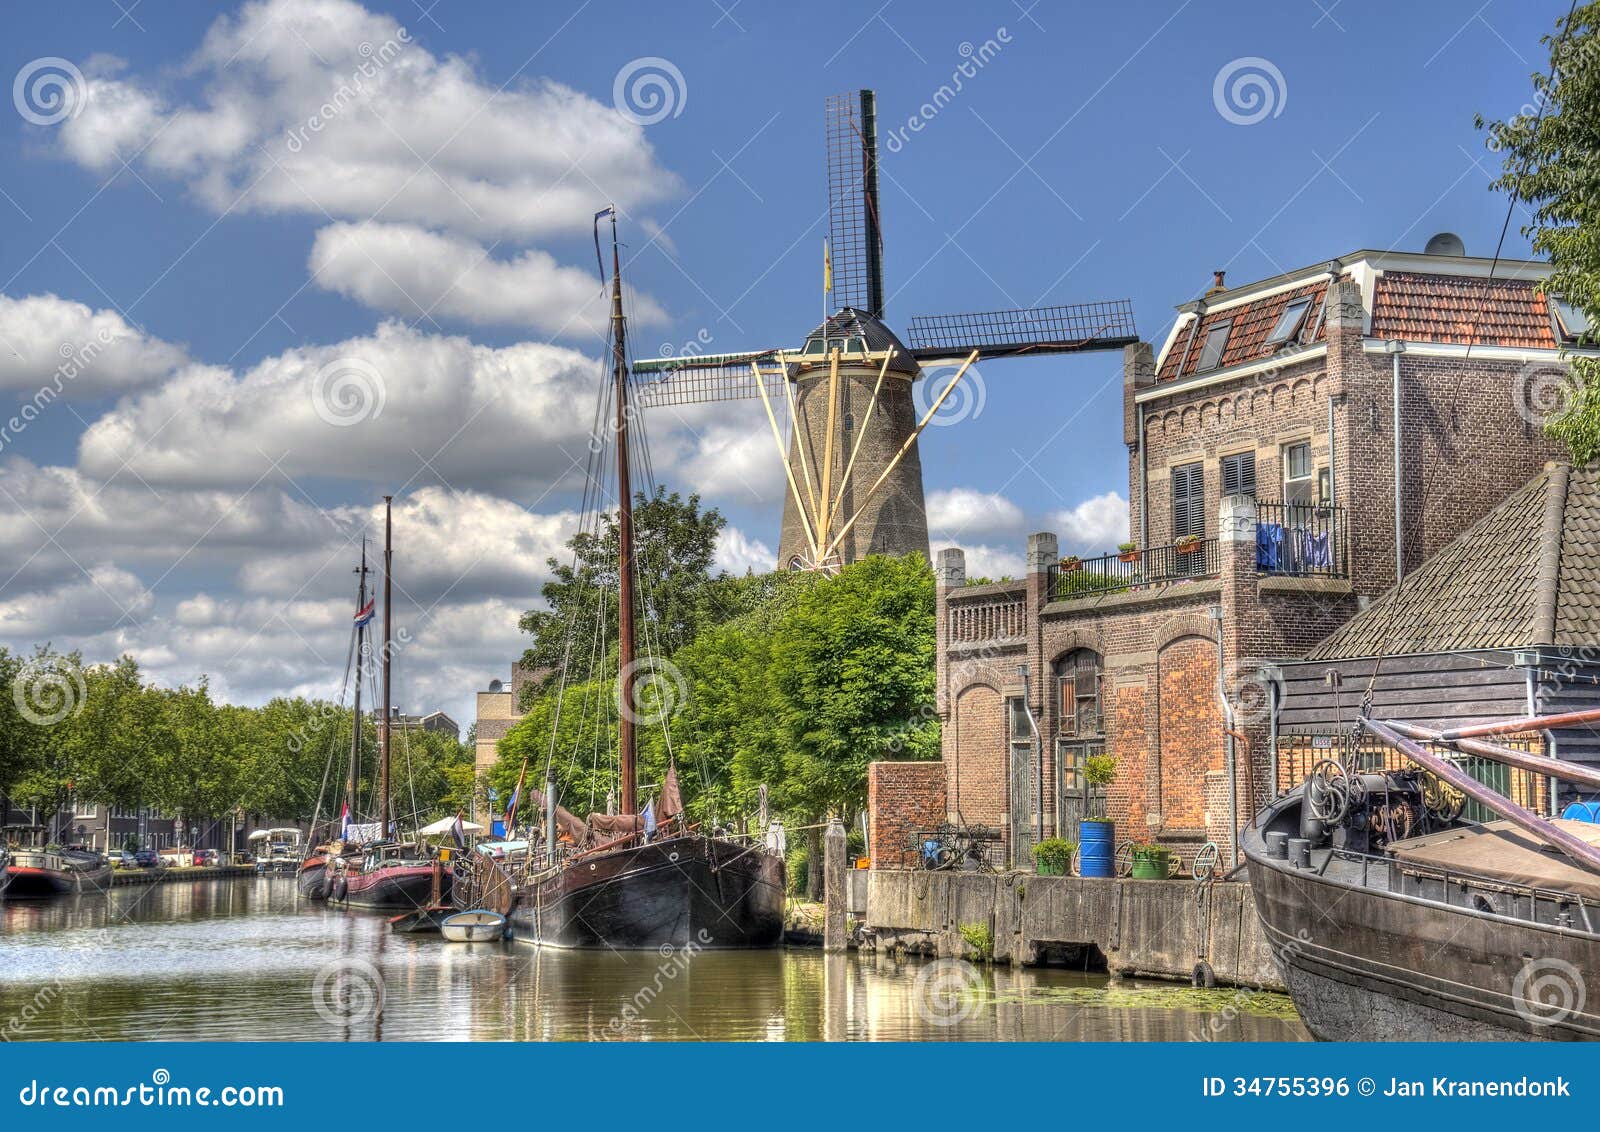 Windmill in Gouda, Holland stock photo. Image of 